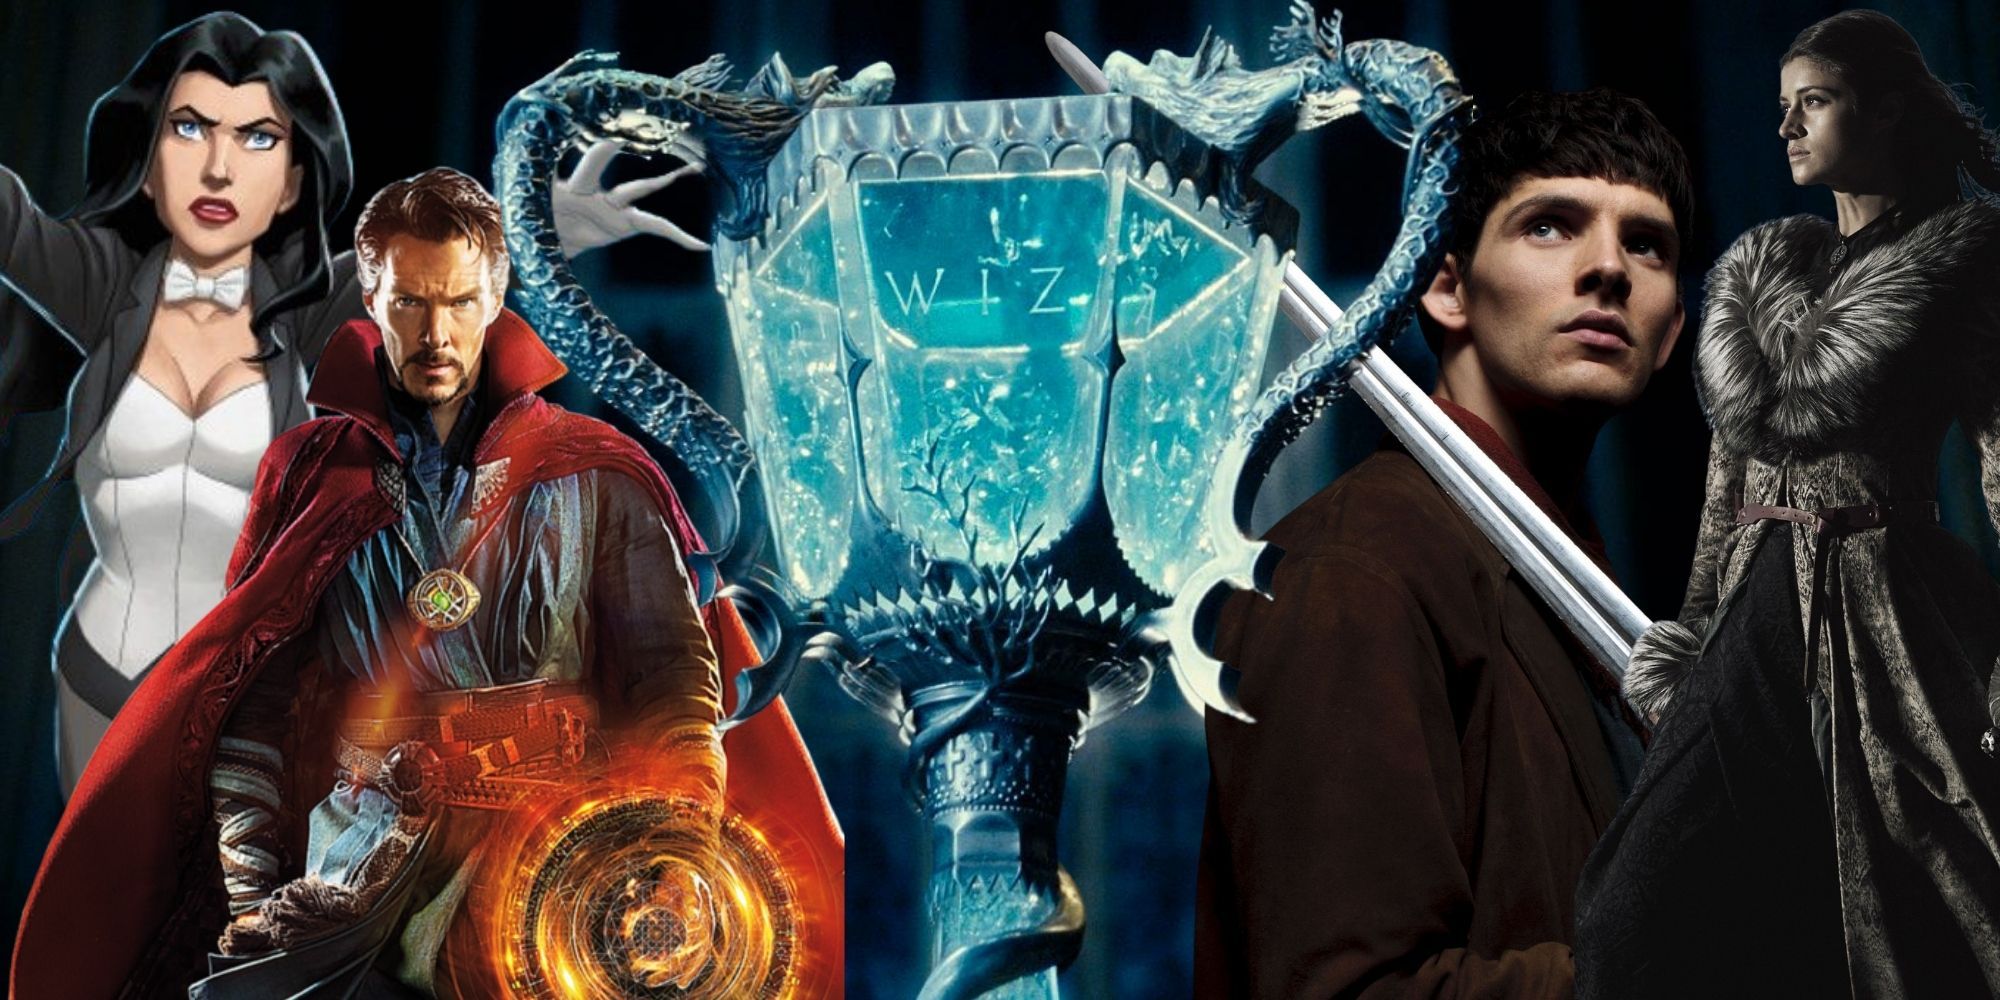 Blended image showing the Triwizard Cup and Zatanna, Doctor Strange, Merlin, and Yennefer of Vengerberg